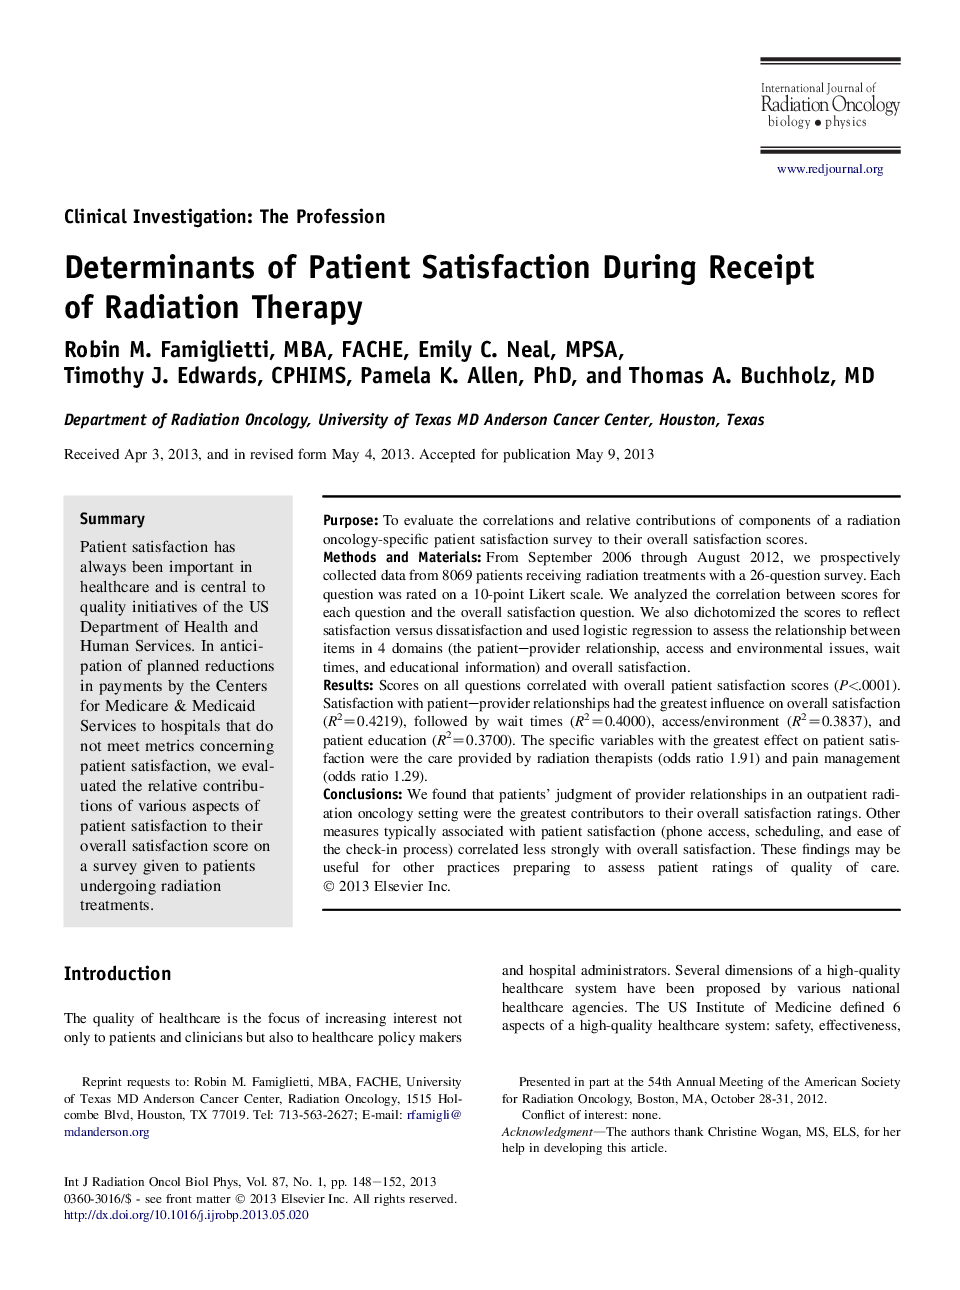 Determinants of Patient Satisfaction During Receipt of Radiation Therapy